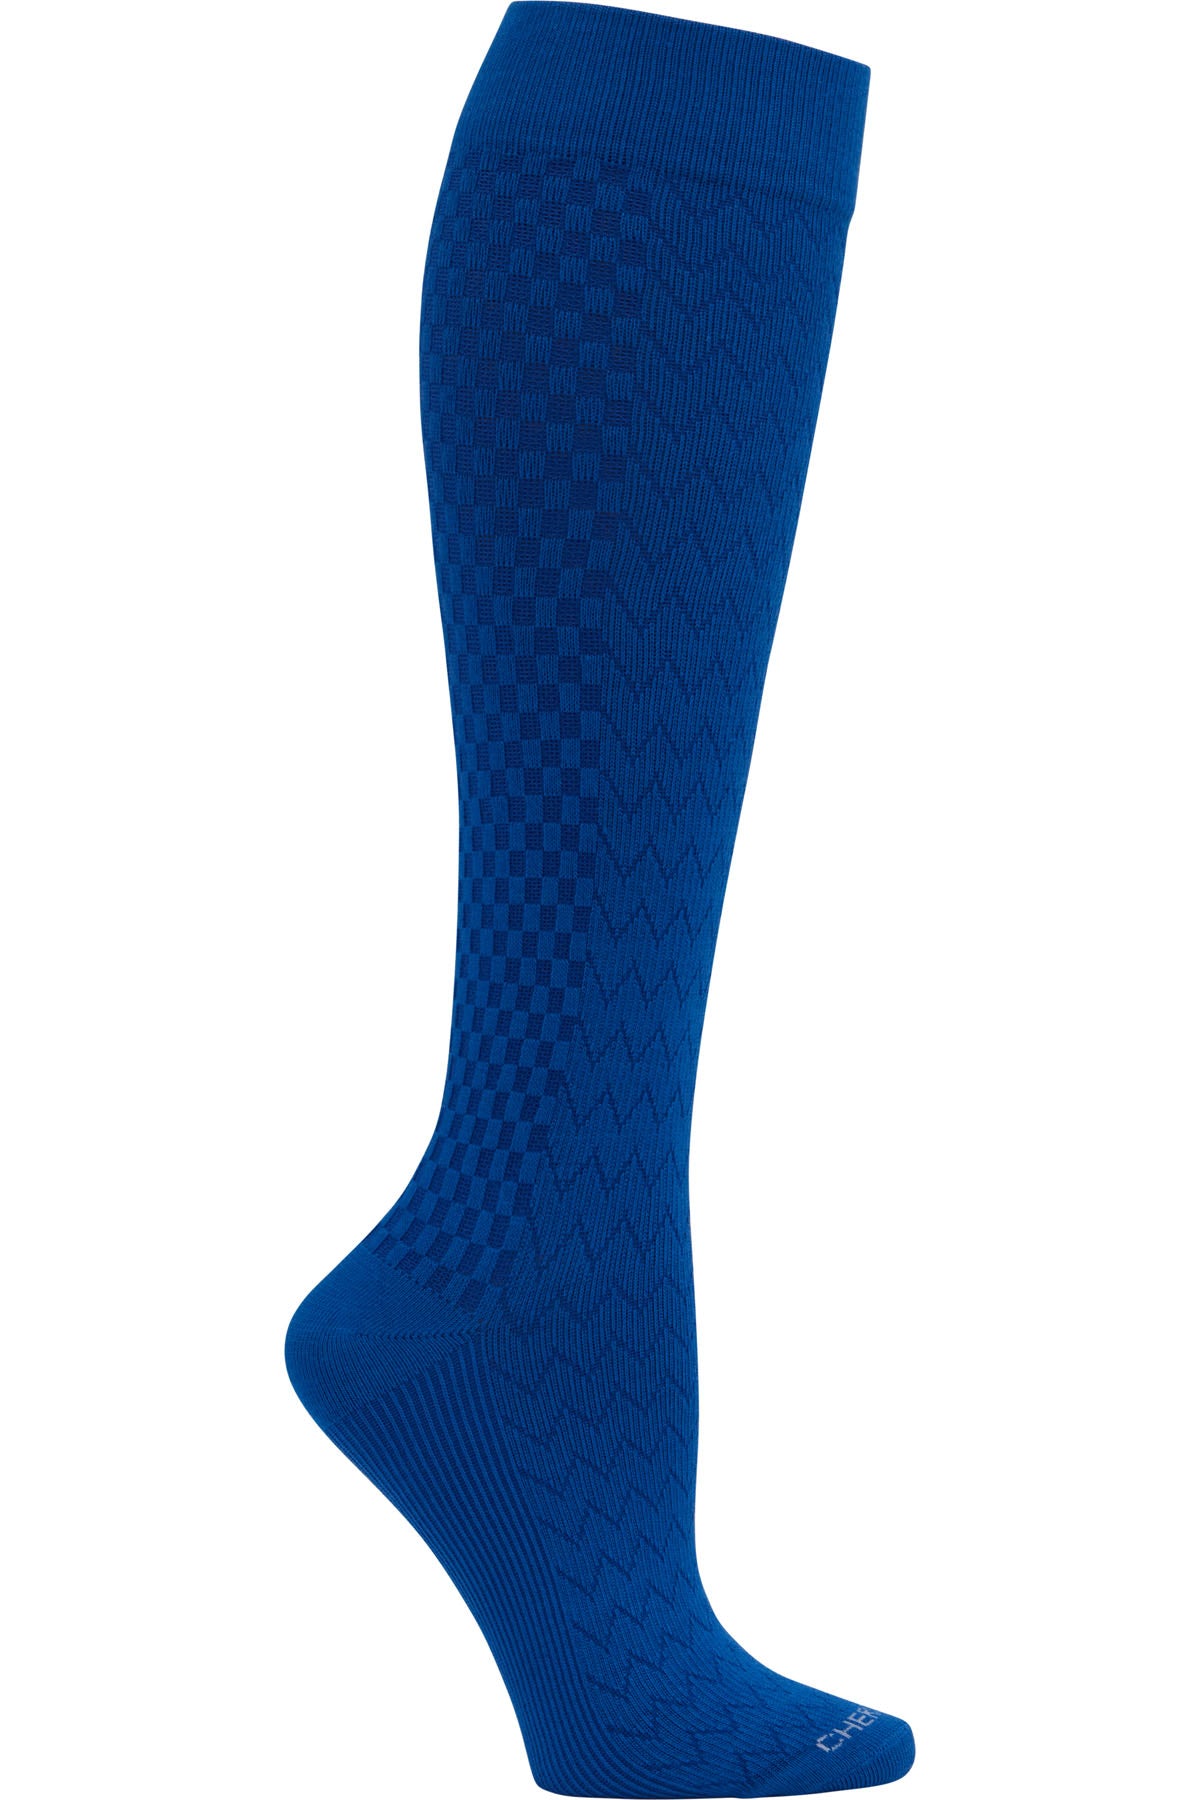 Cherokee Mild Compression Socks True Support 10-15 mmHg in Imperial at Parker's Clothing and Shoes.